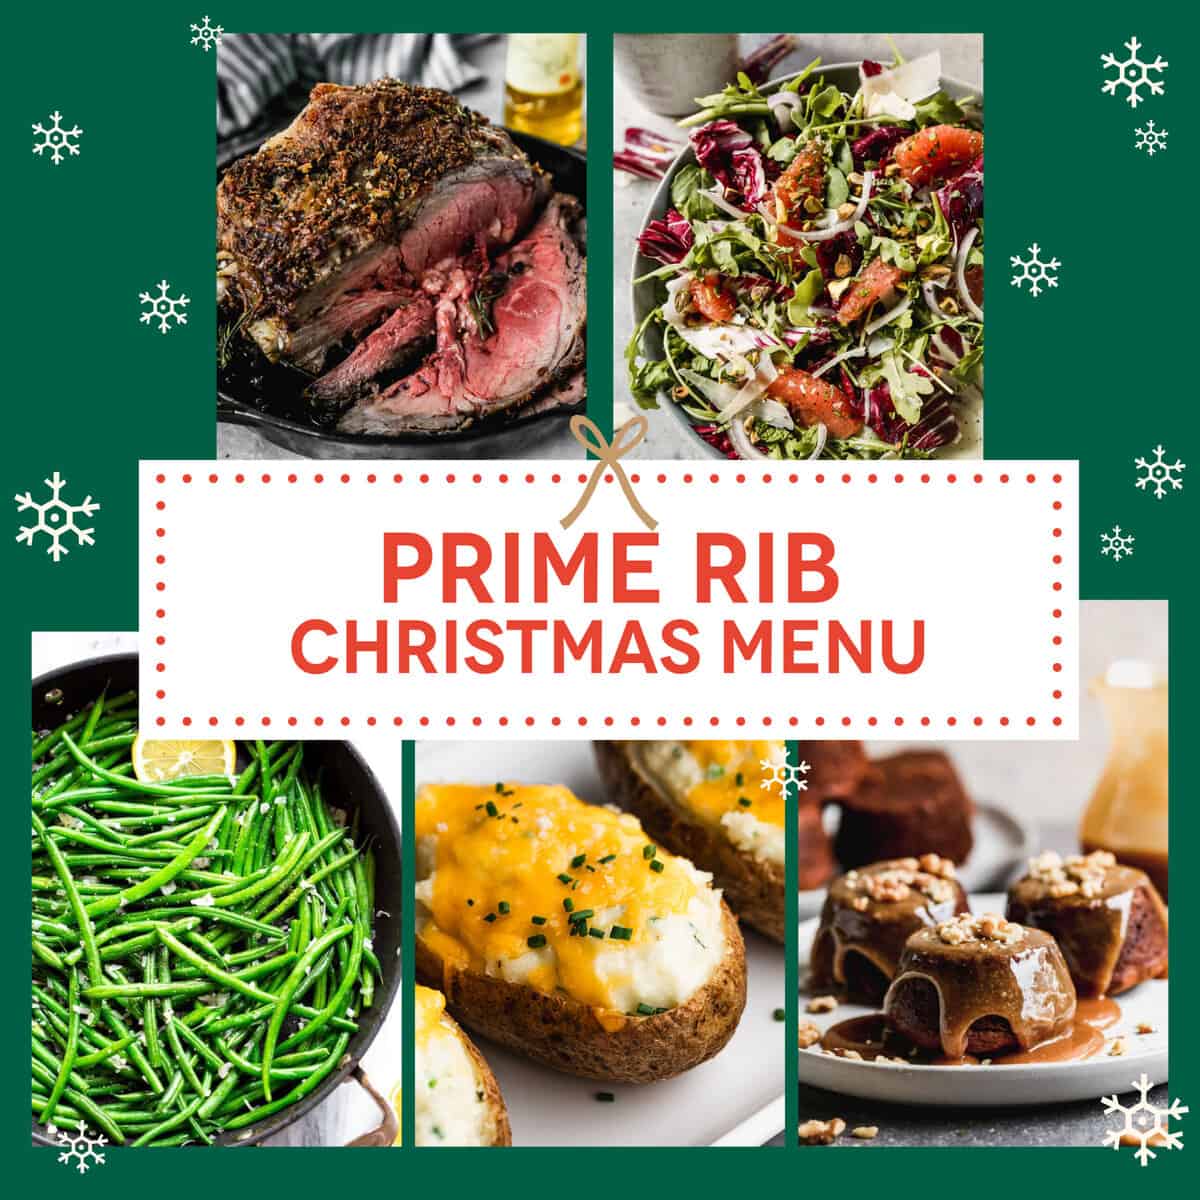 A graphic showing the perfect side dishes and dessert to go with Prime Rib for Christmas Dinner.